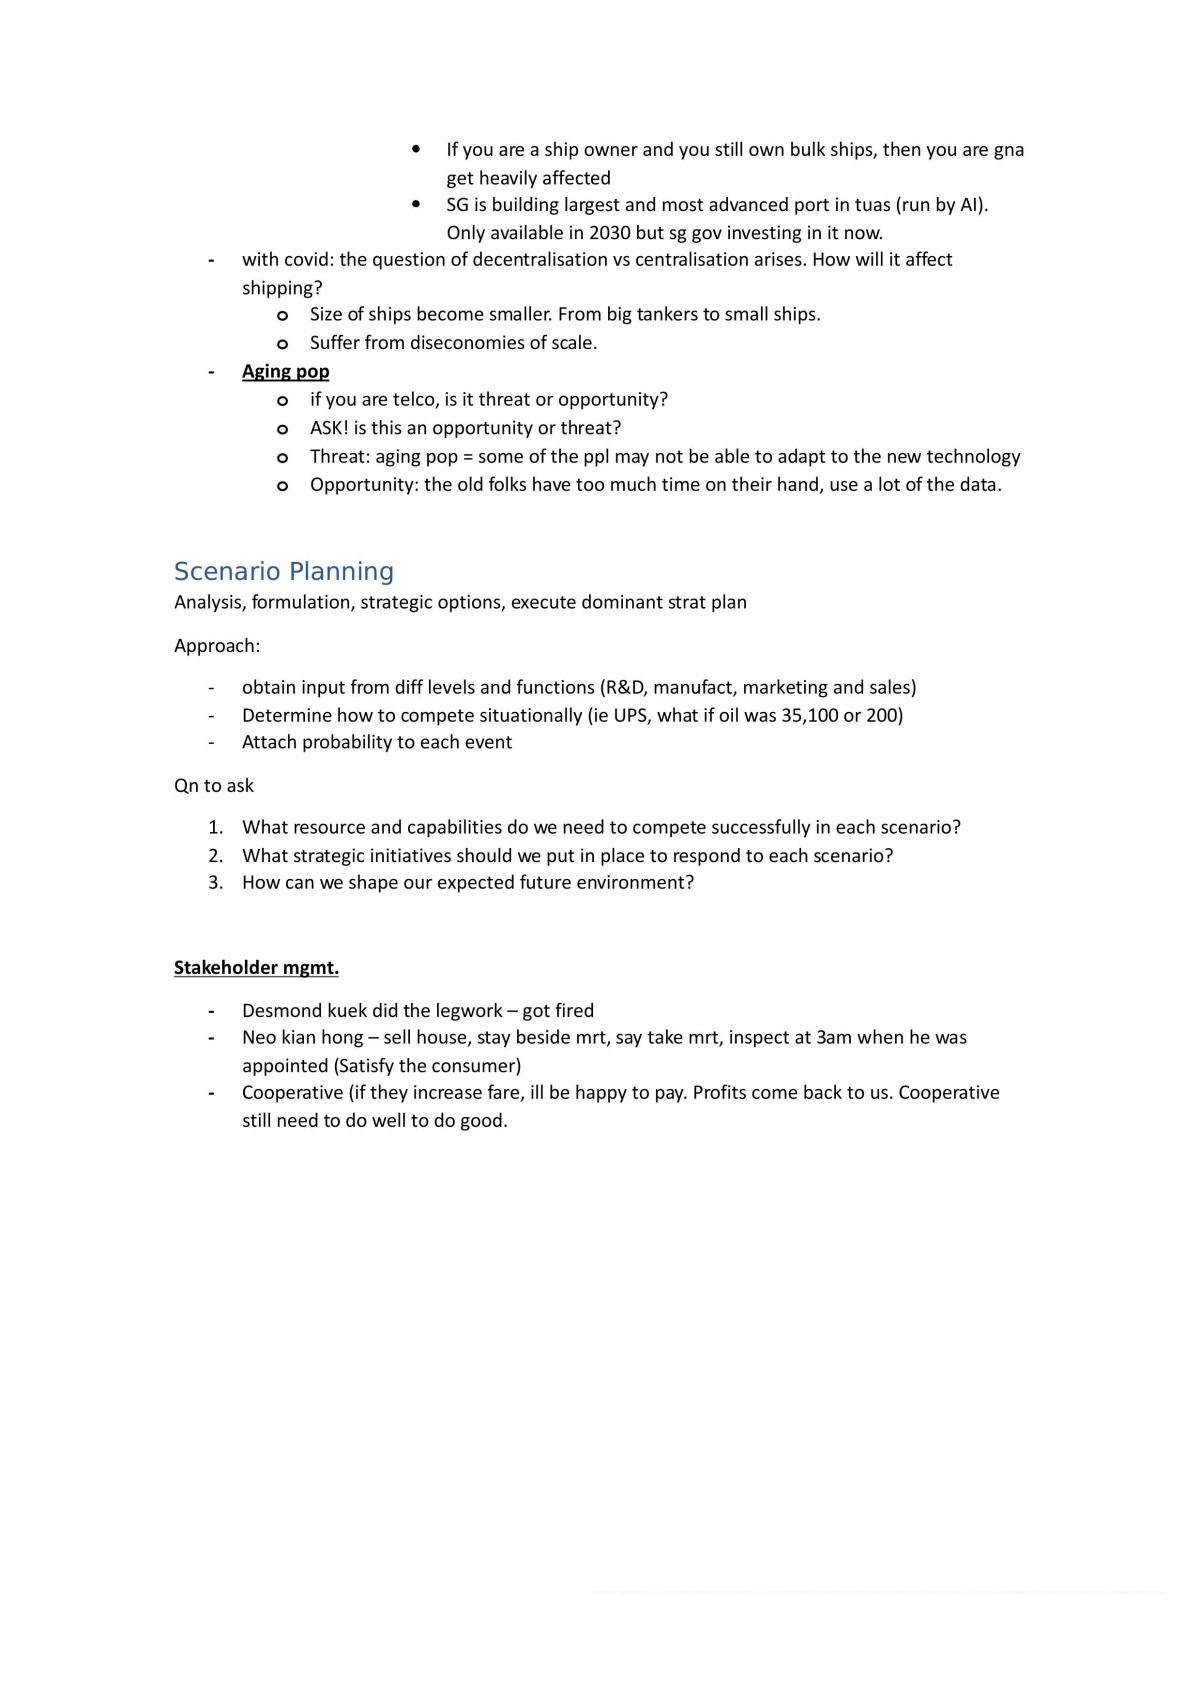 Summary of Strategy - Page 3